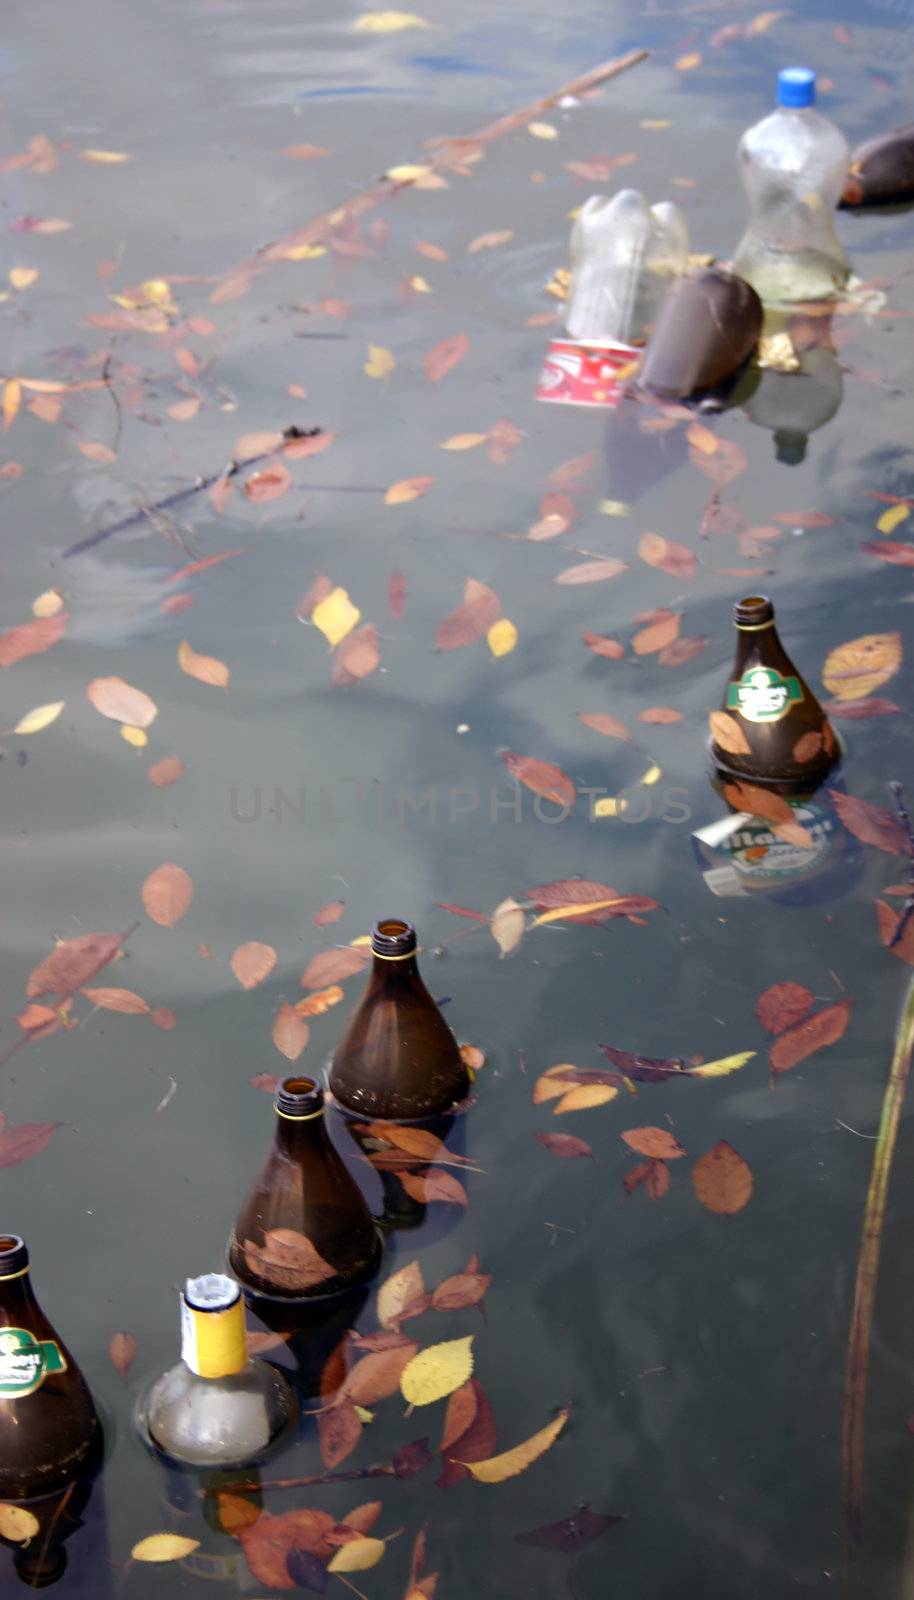 empty bottles drifting in water, concept: pollution